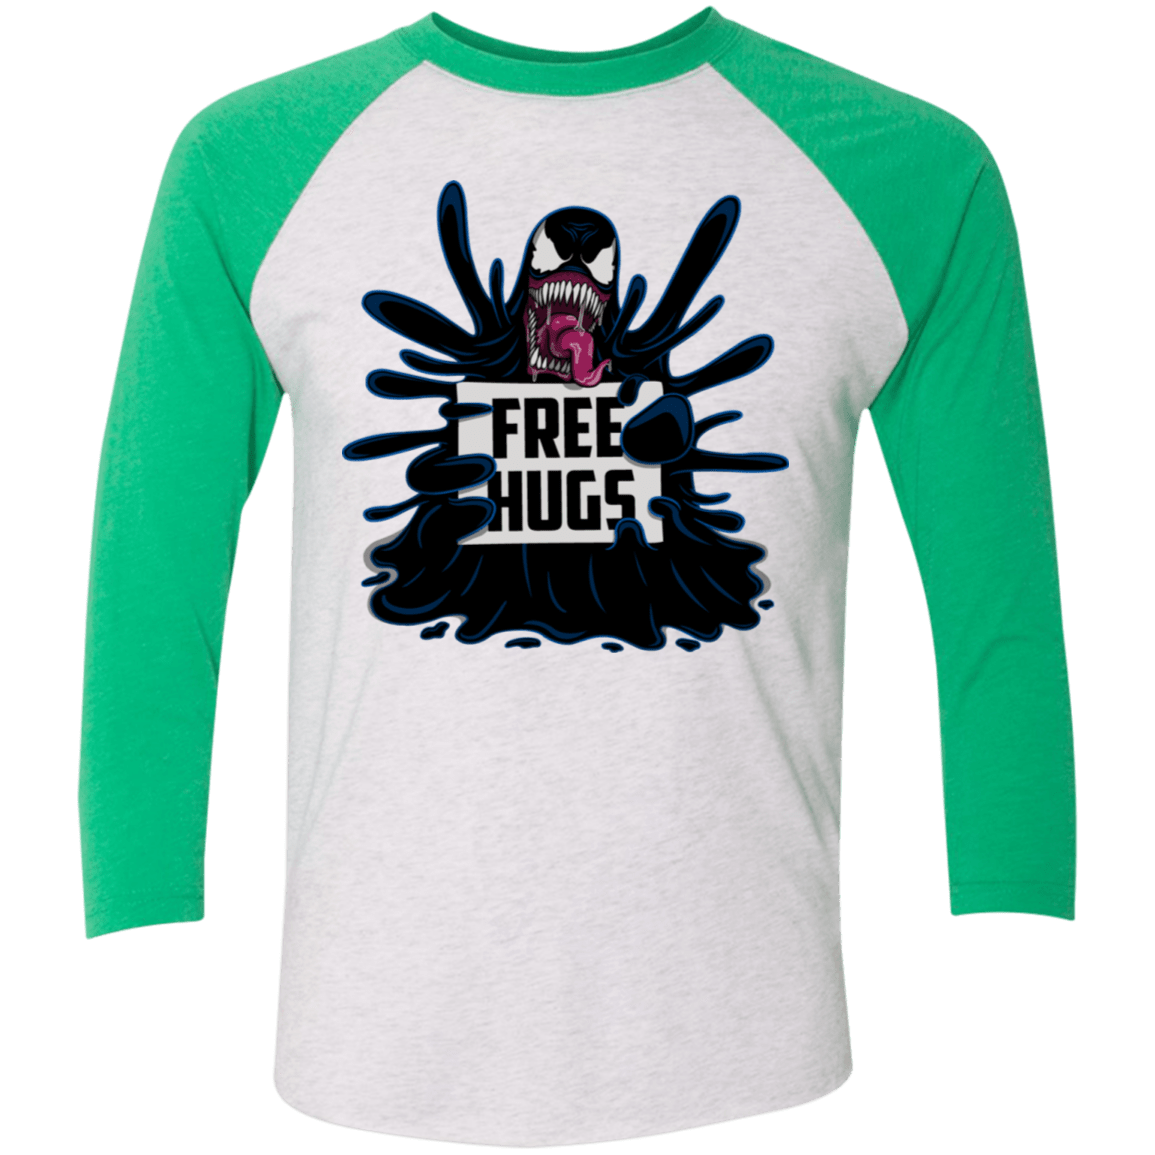 T-Shirts Heather White/Envy / X-Small Symbiote Hugs Men's Triblend 3/4 Sleeve